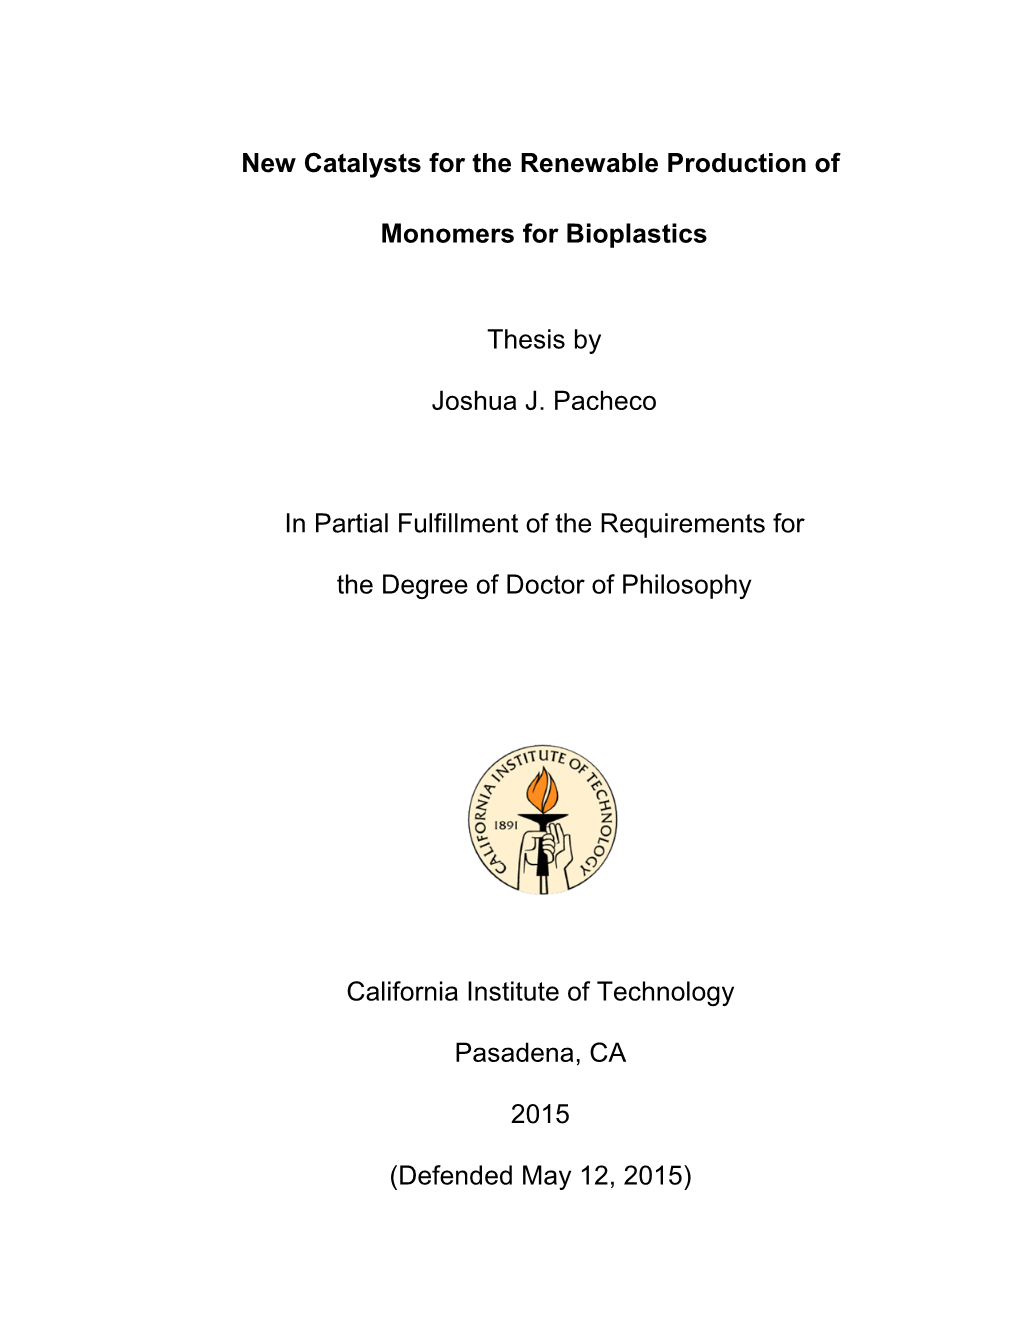 New Catalysts for the Renewable Production Of